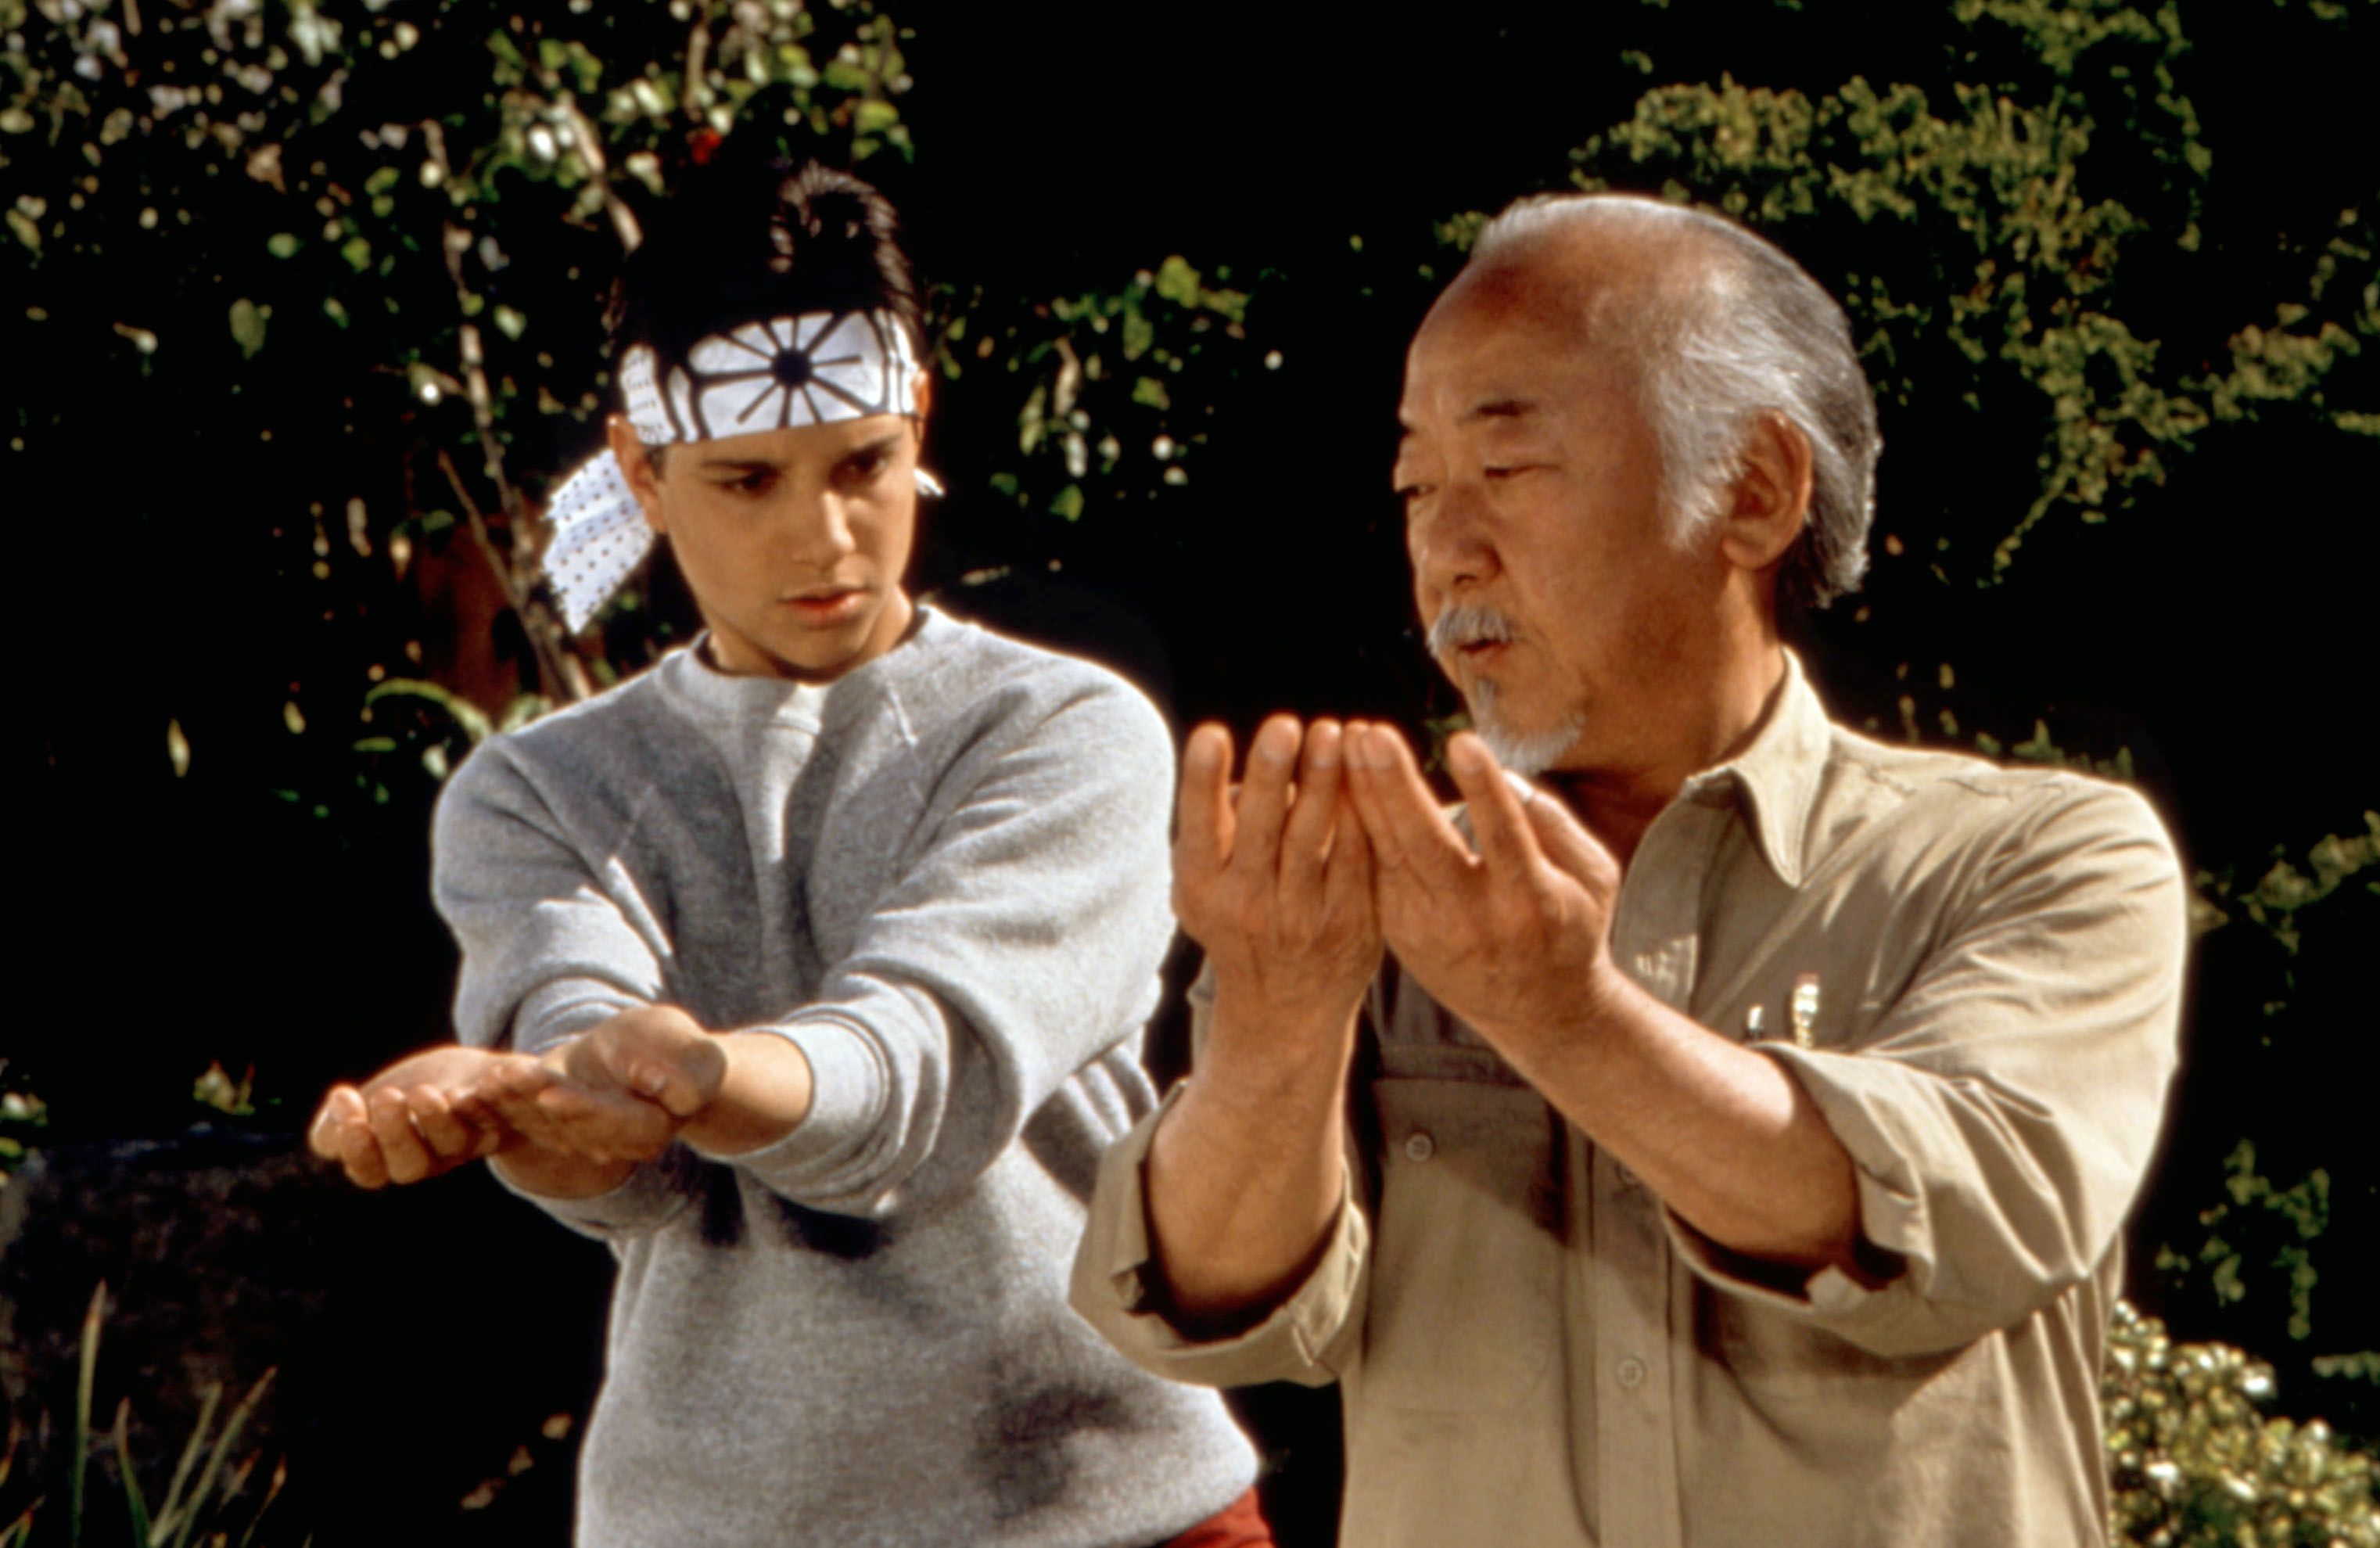 'Karate Kid' Stars Are Going Another Round, 34 Years After The Original Movie